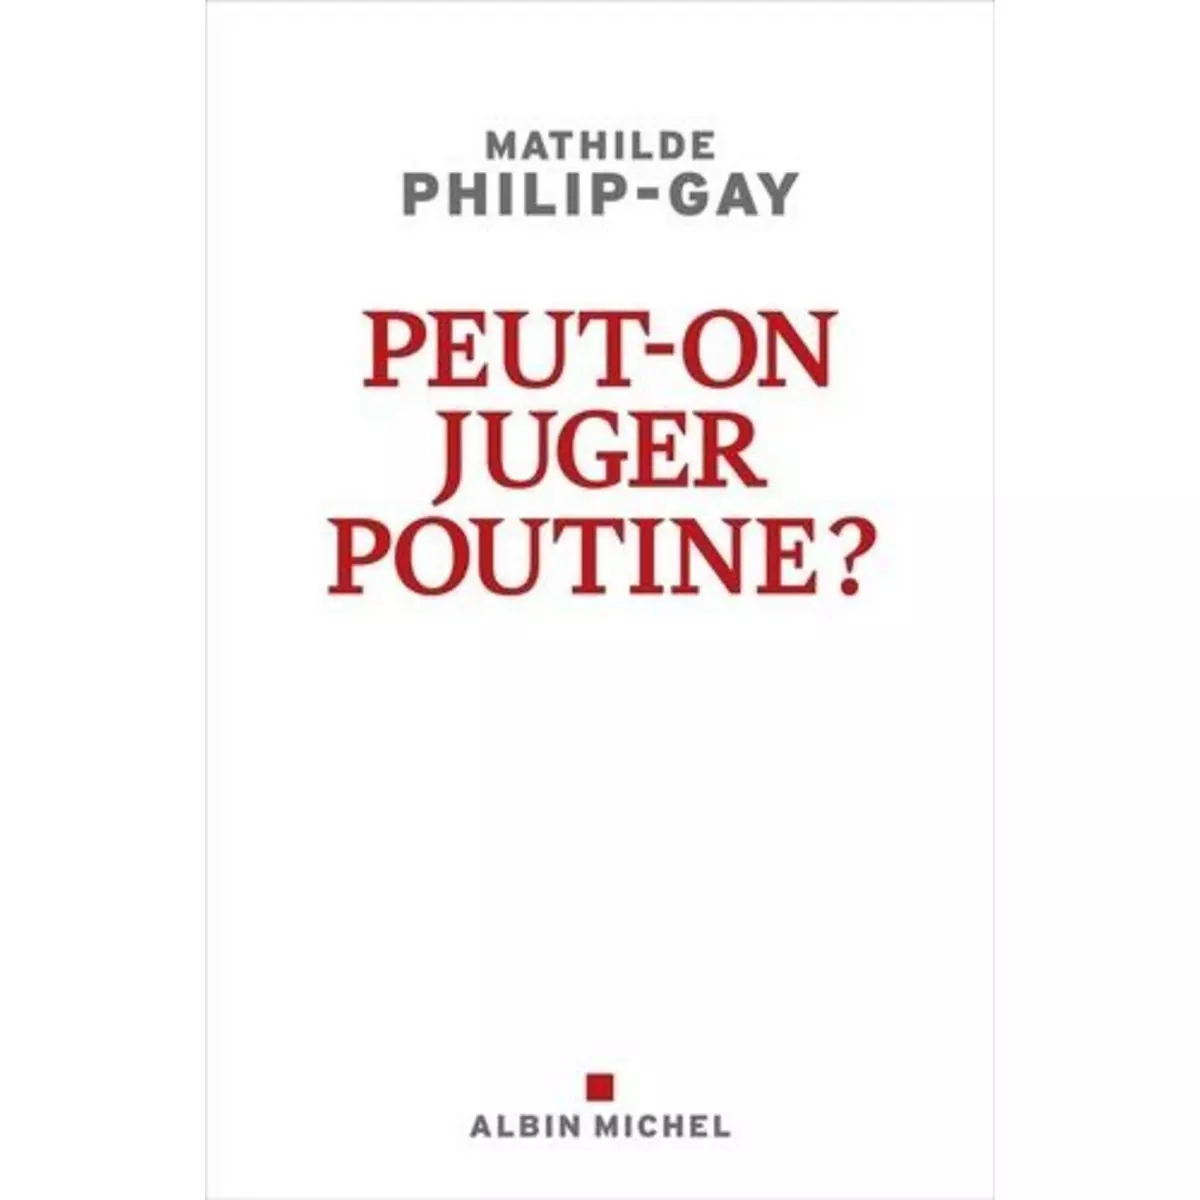  PEUT-ON JUGER POUTINE ?, Philip-Gay Mathilde